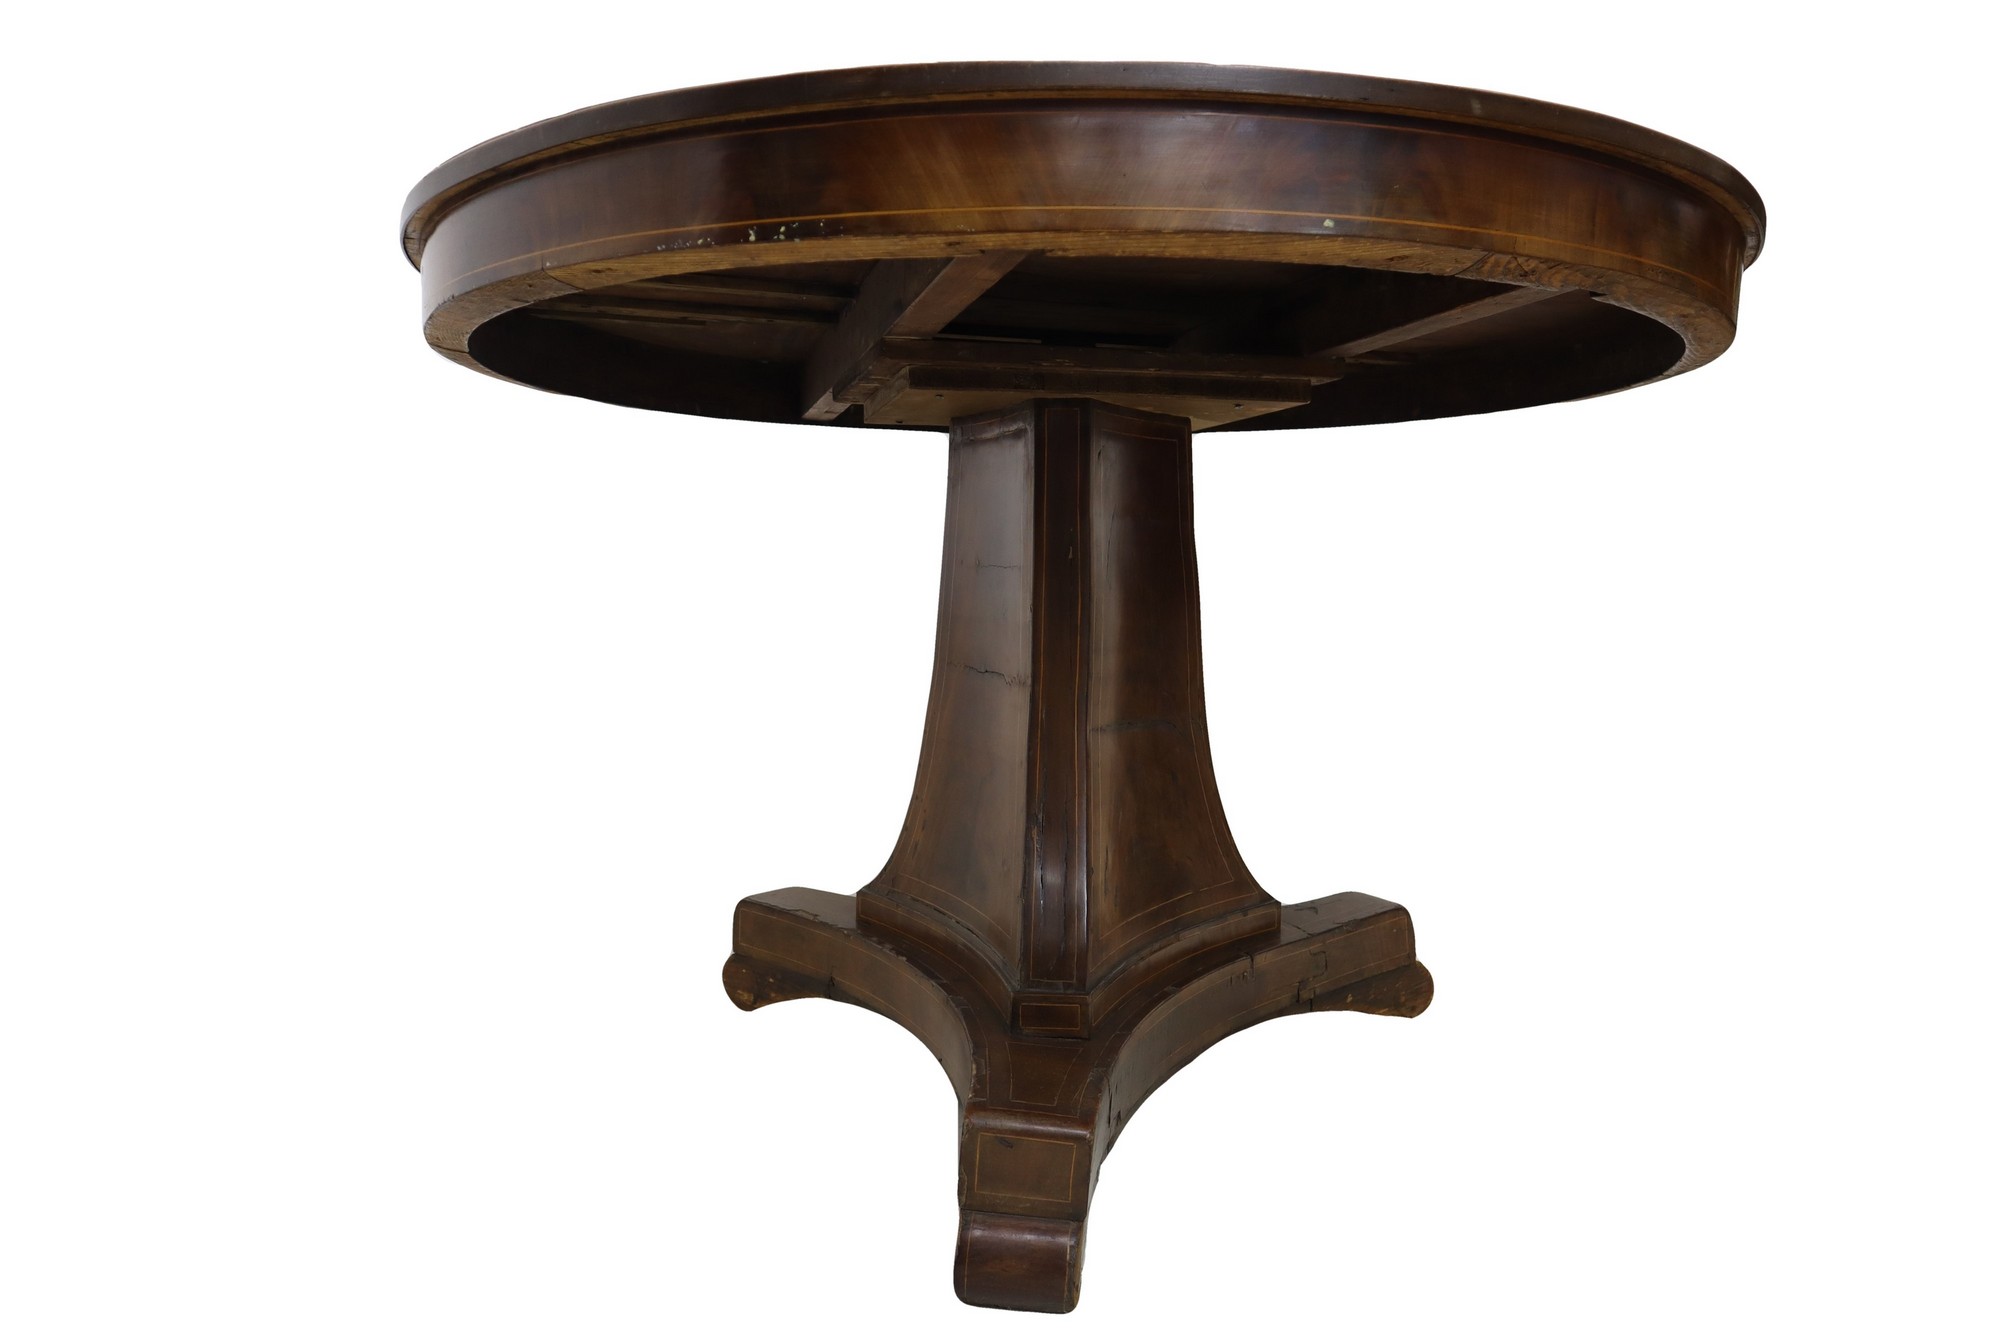 Round table in mahogany wood with 6 chairs, nineteenth century - Image 4 of 6